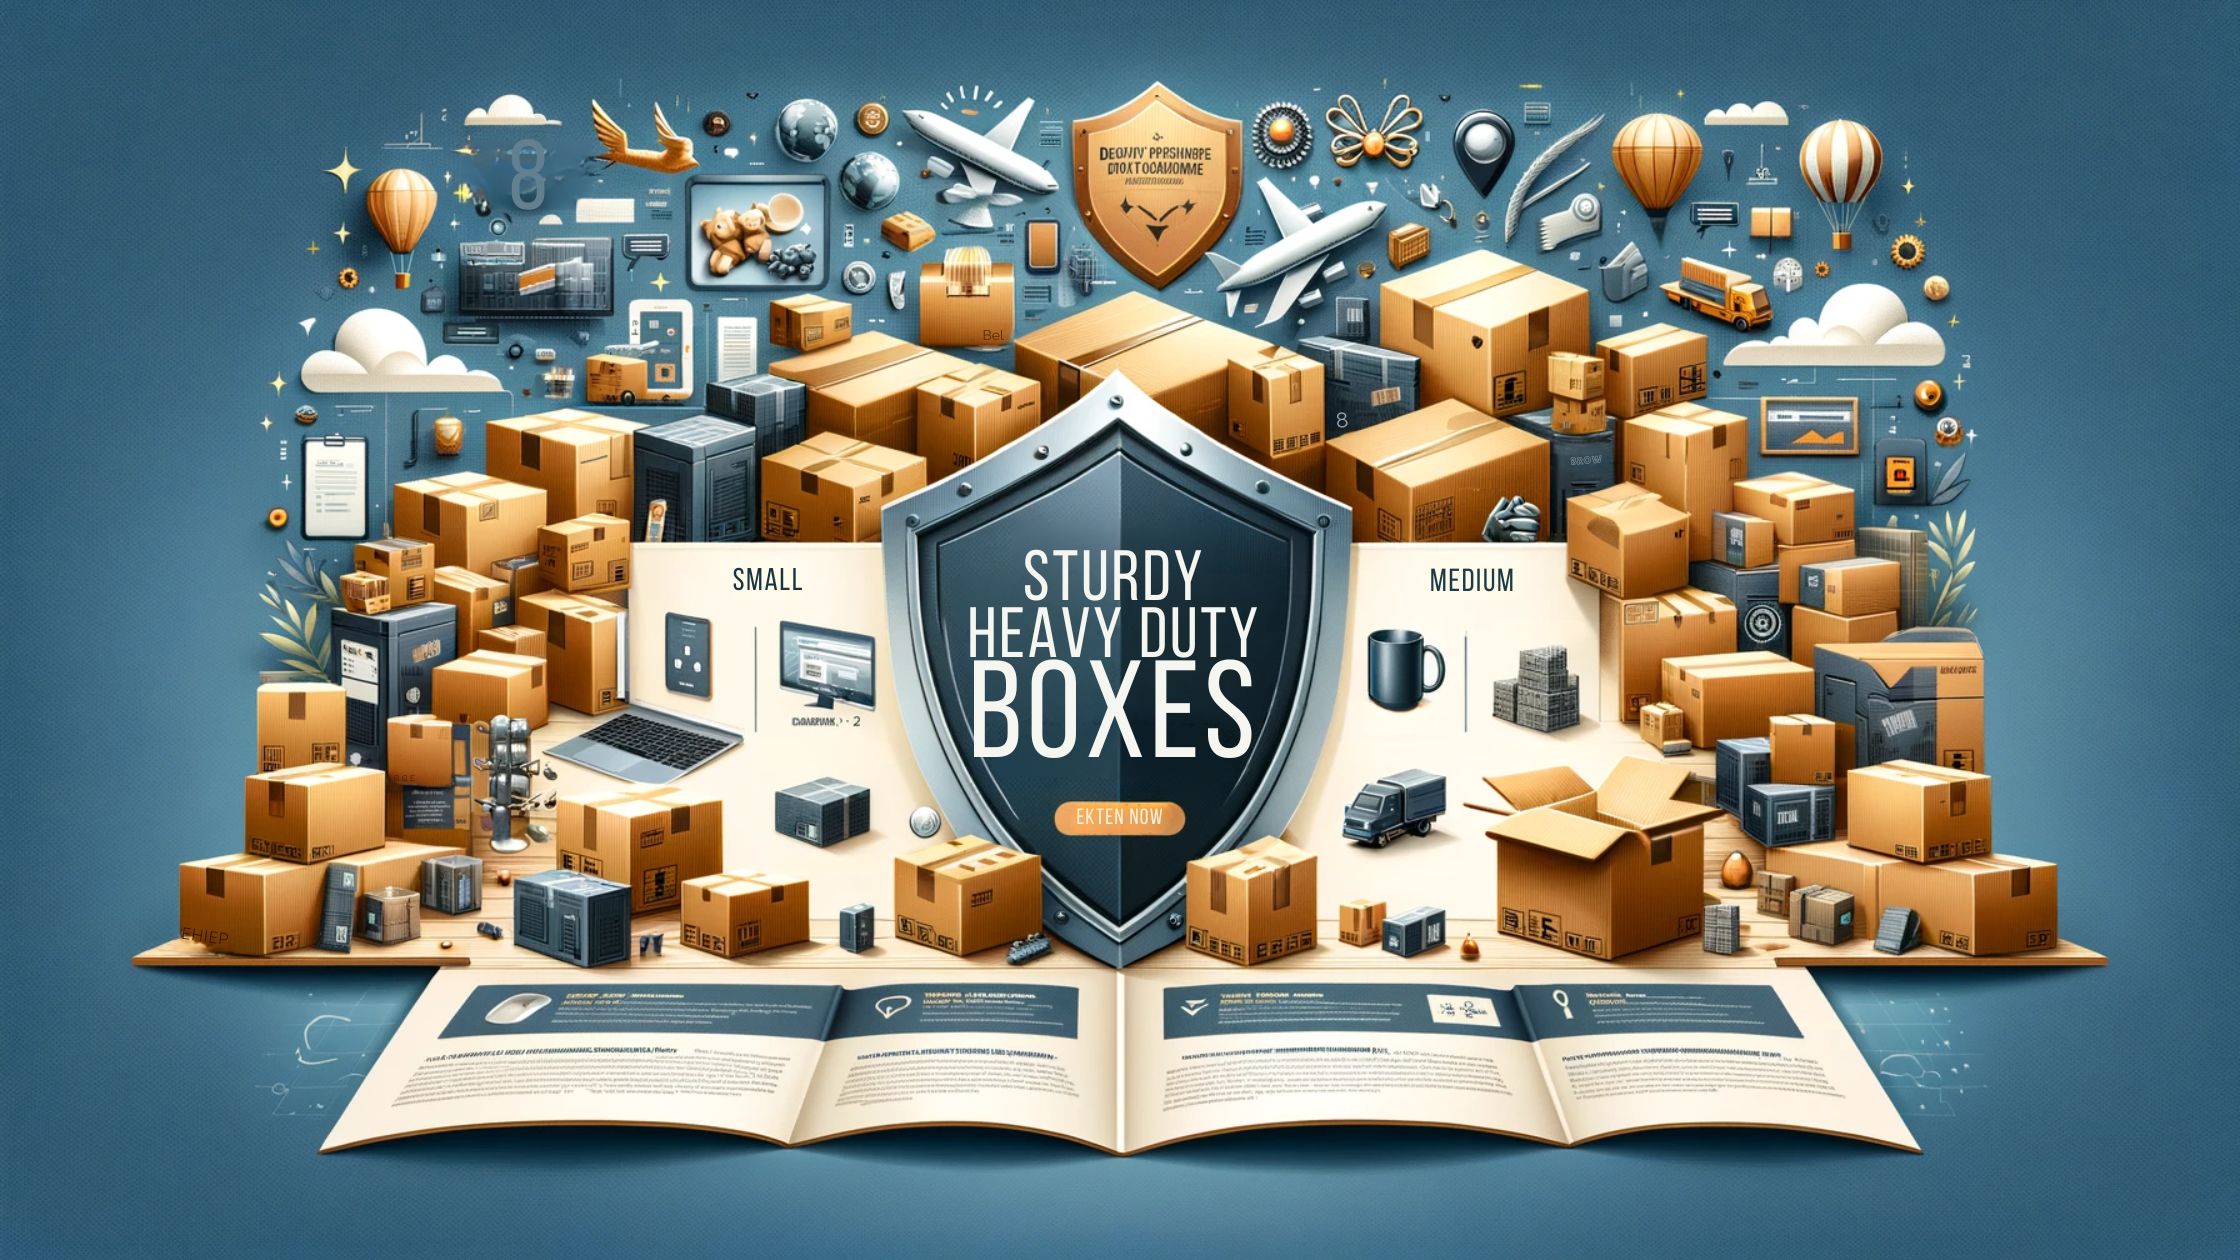 Discover Sturdy Heavy Duty Boxes Near You – The Ultimate Guide to Durable Packaging!